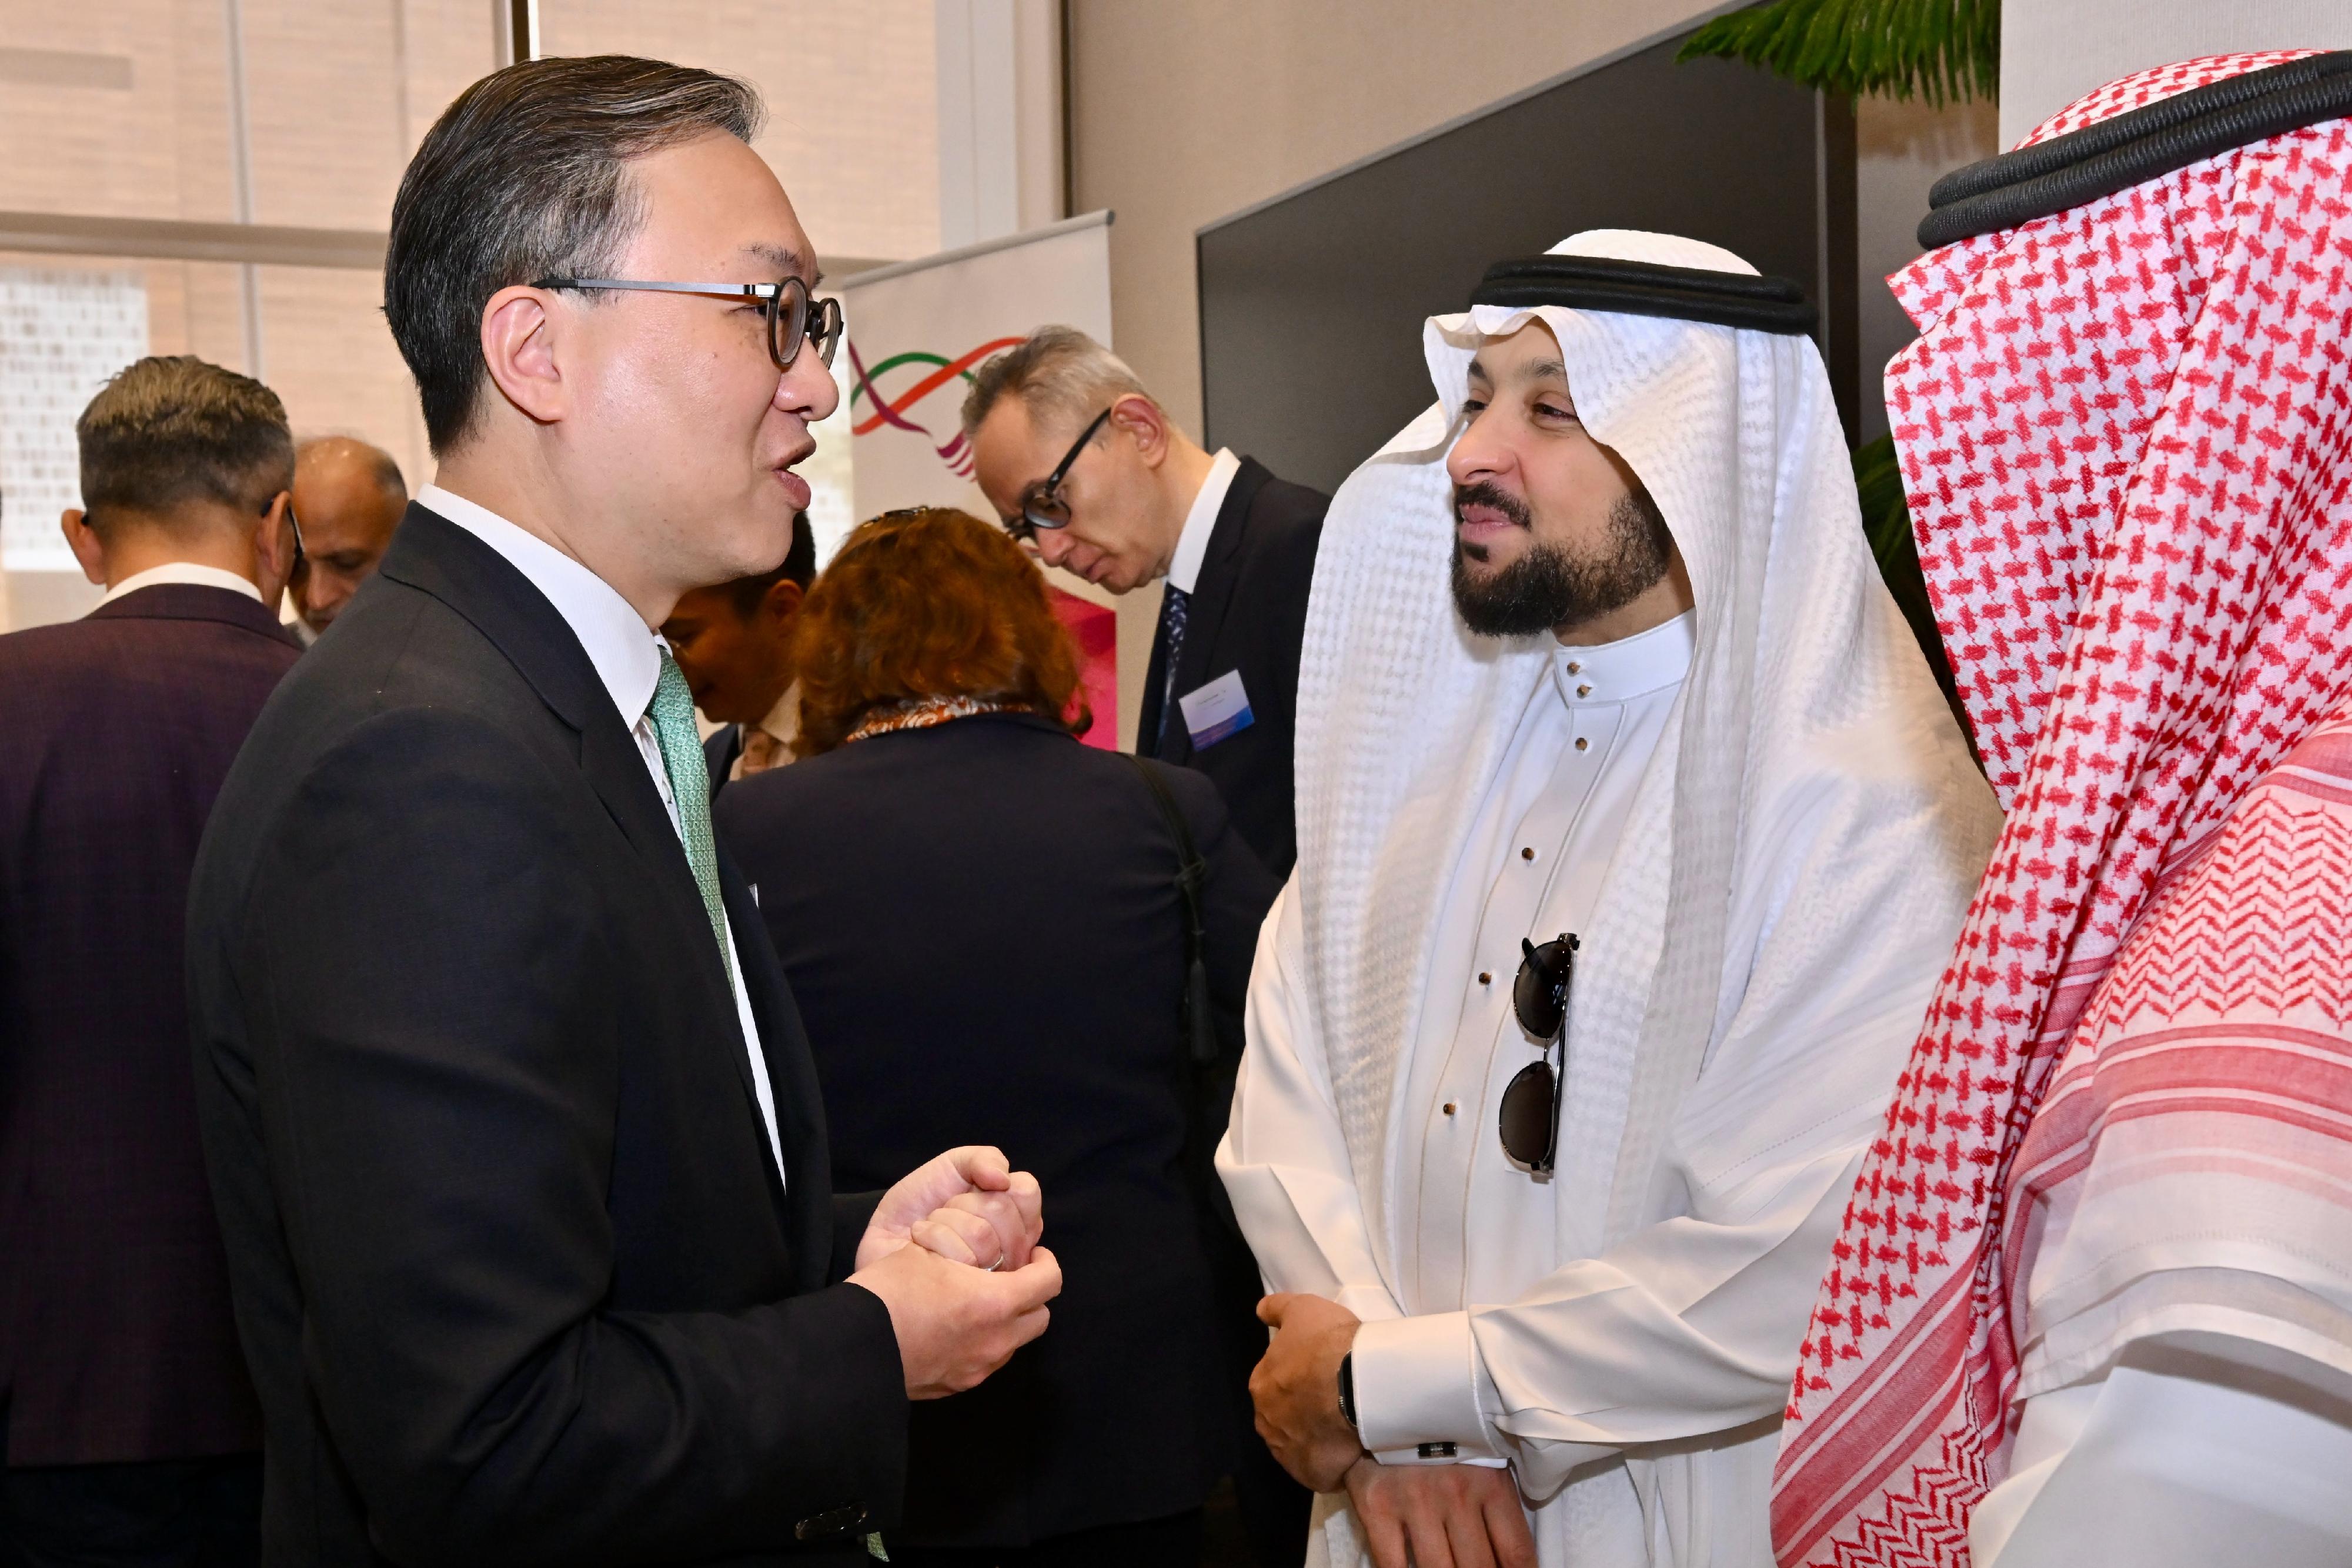 The Secretary for Justice, Mr Paul Lam, SC, arrived in Riyadh, Saudi Arabia, today (May 19, Riyadh time) with his about 30-person delegation, comprising representatives from the Law Society of Hong Kong, the Hong Kong Bar Association, the Hong Kong Exchanges and Clearing Limited, Invest Hong Kong and related sectors, and began a two-day visit to the city. Photo shows Mr Lam (left) chatting with the Chief Executive Officer of the Saudi Center for Commercial Arbitration, Dr Hamed Merah (right), at a lunch and networking reception titled "Hong Kong – The Common Law Gateway for Saudi Arabia Businesses to China and Beyond", co-organised by the Department of Justice, the Hong Kong Economic and Trade Office in Dubai, the Hong Kong Trade Development Council and the Saudi Chinese Business Council, and supported by Invest Hong Kong.